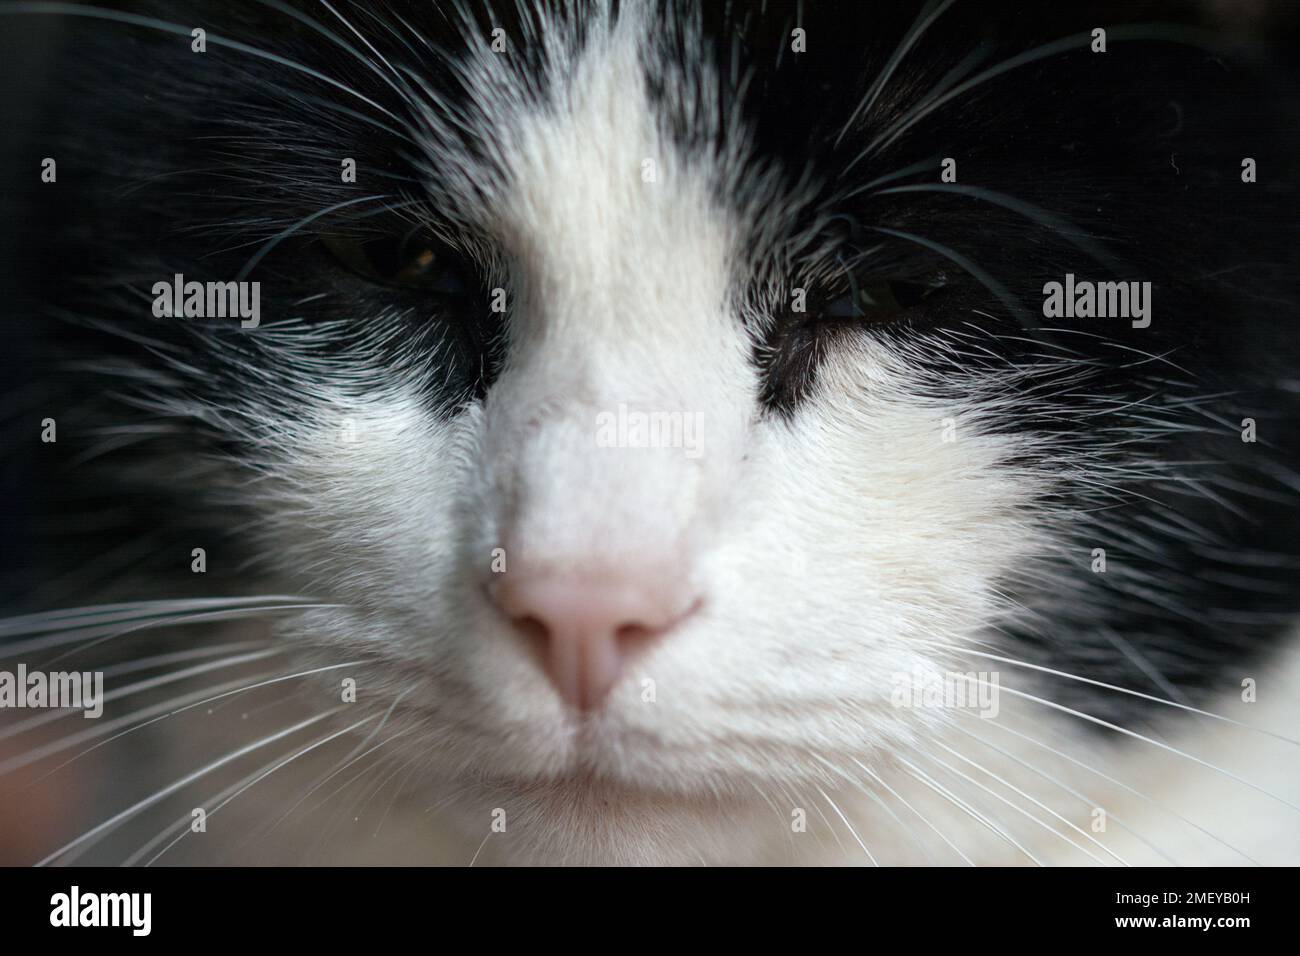 Closeup of black and white cat's face - closed eyes Stock Photo